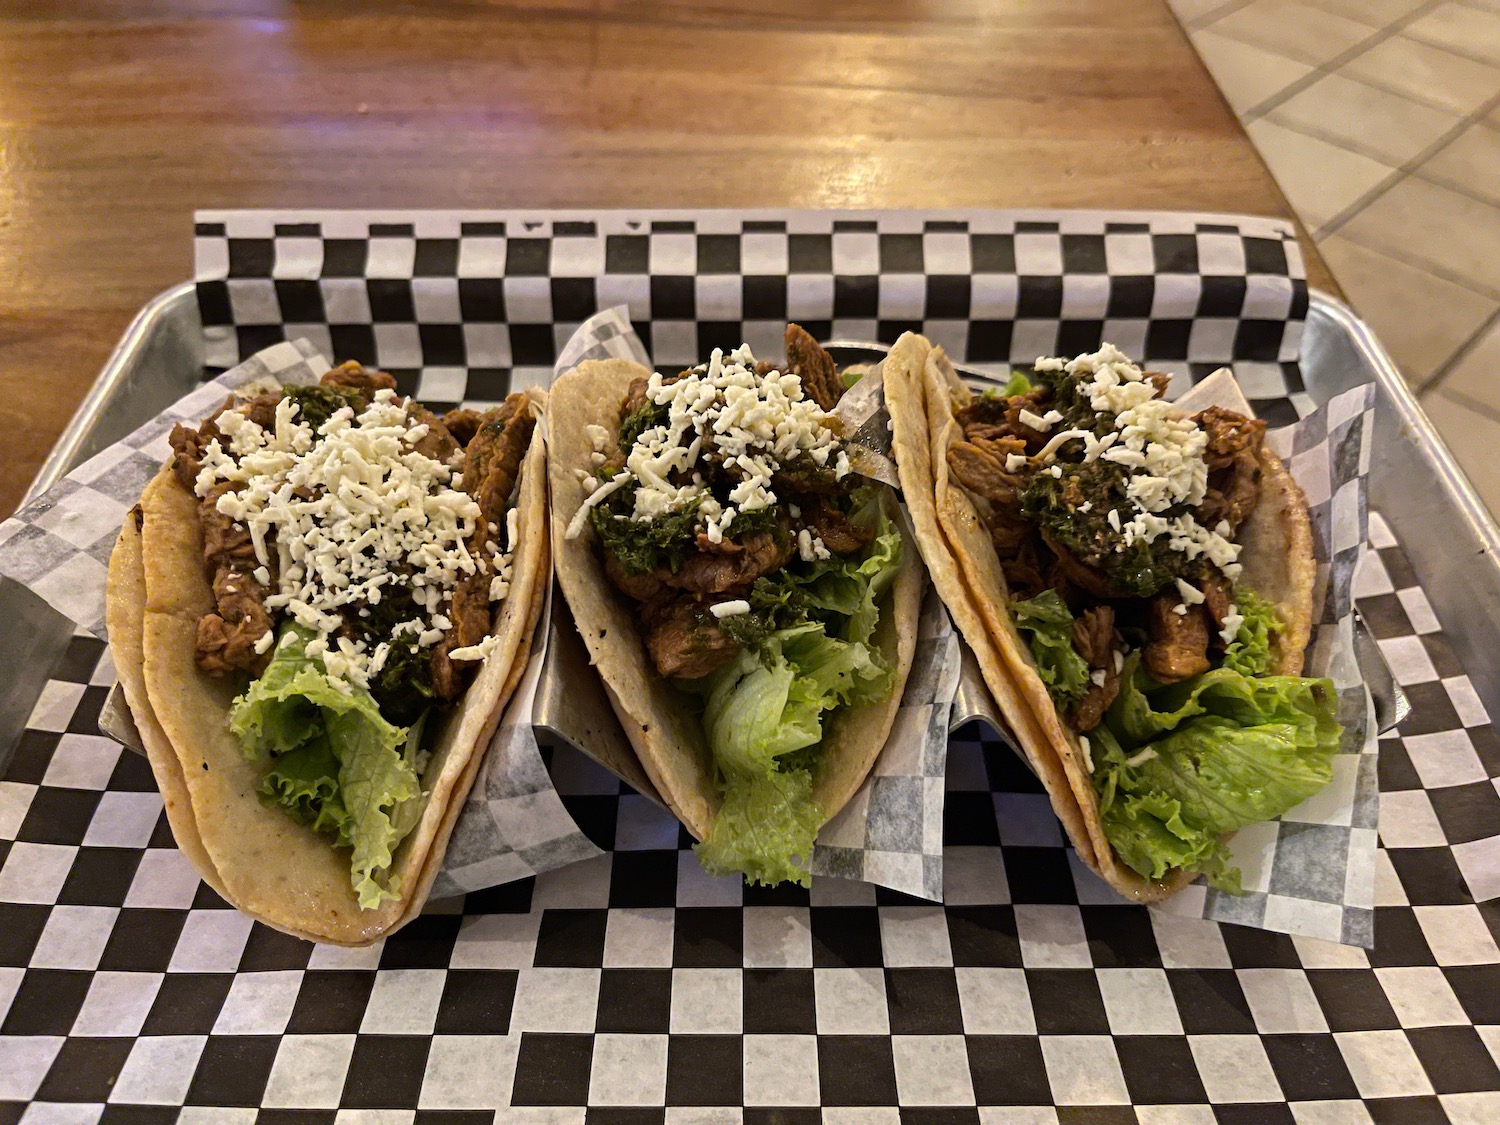 a group of tacos on a checkered surface